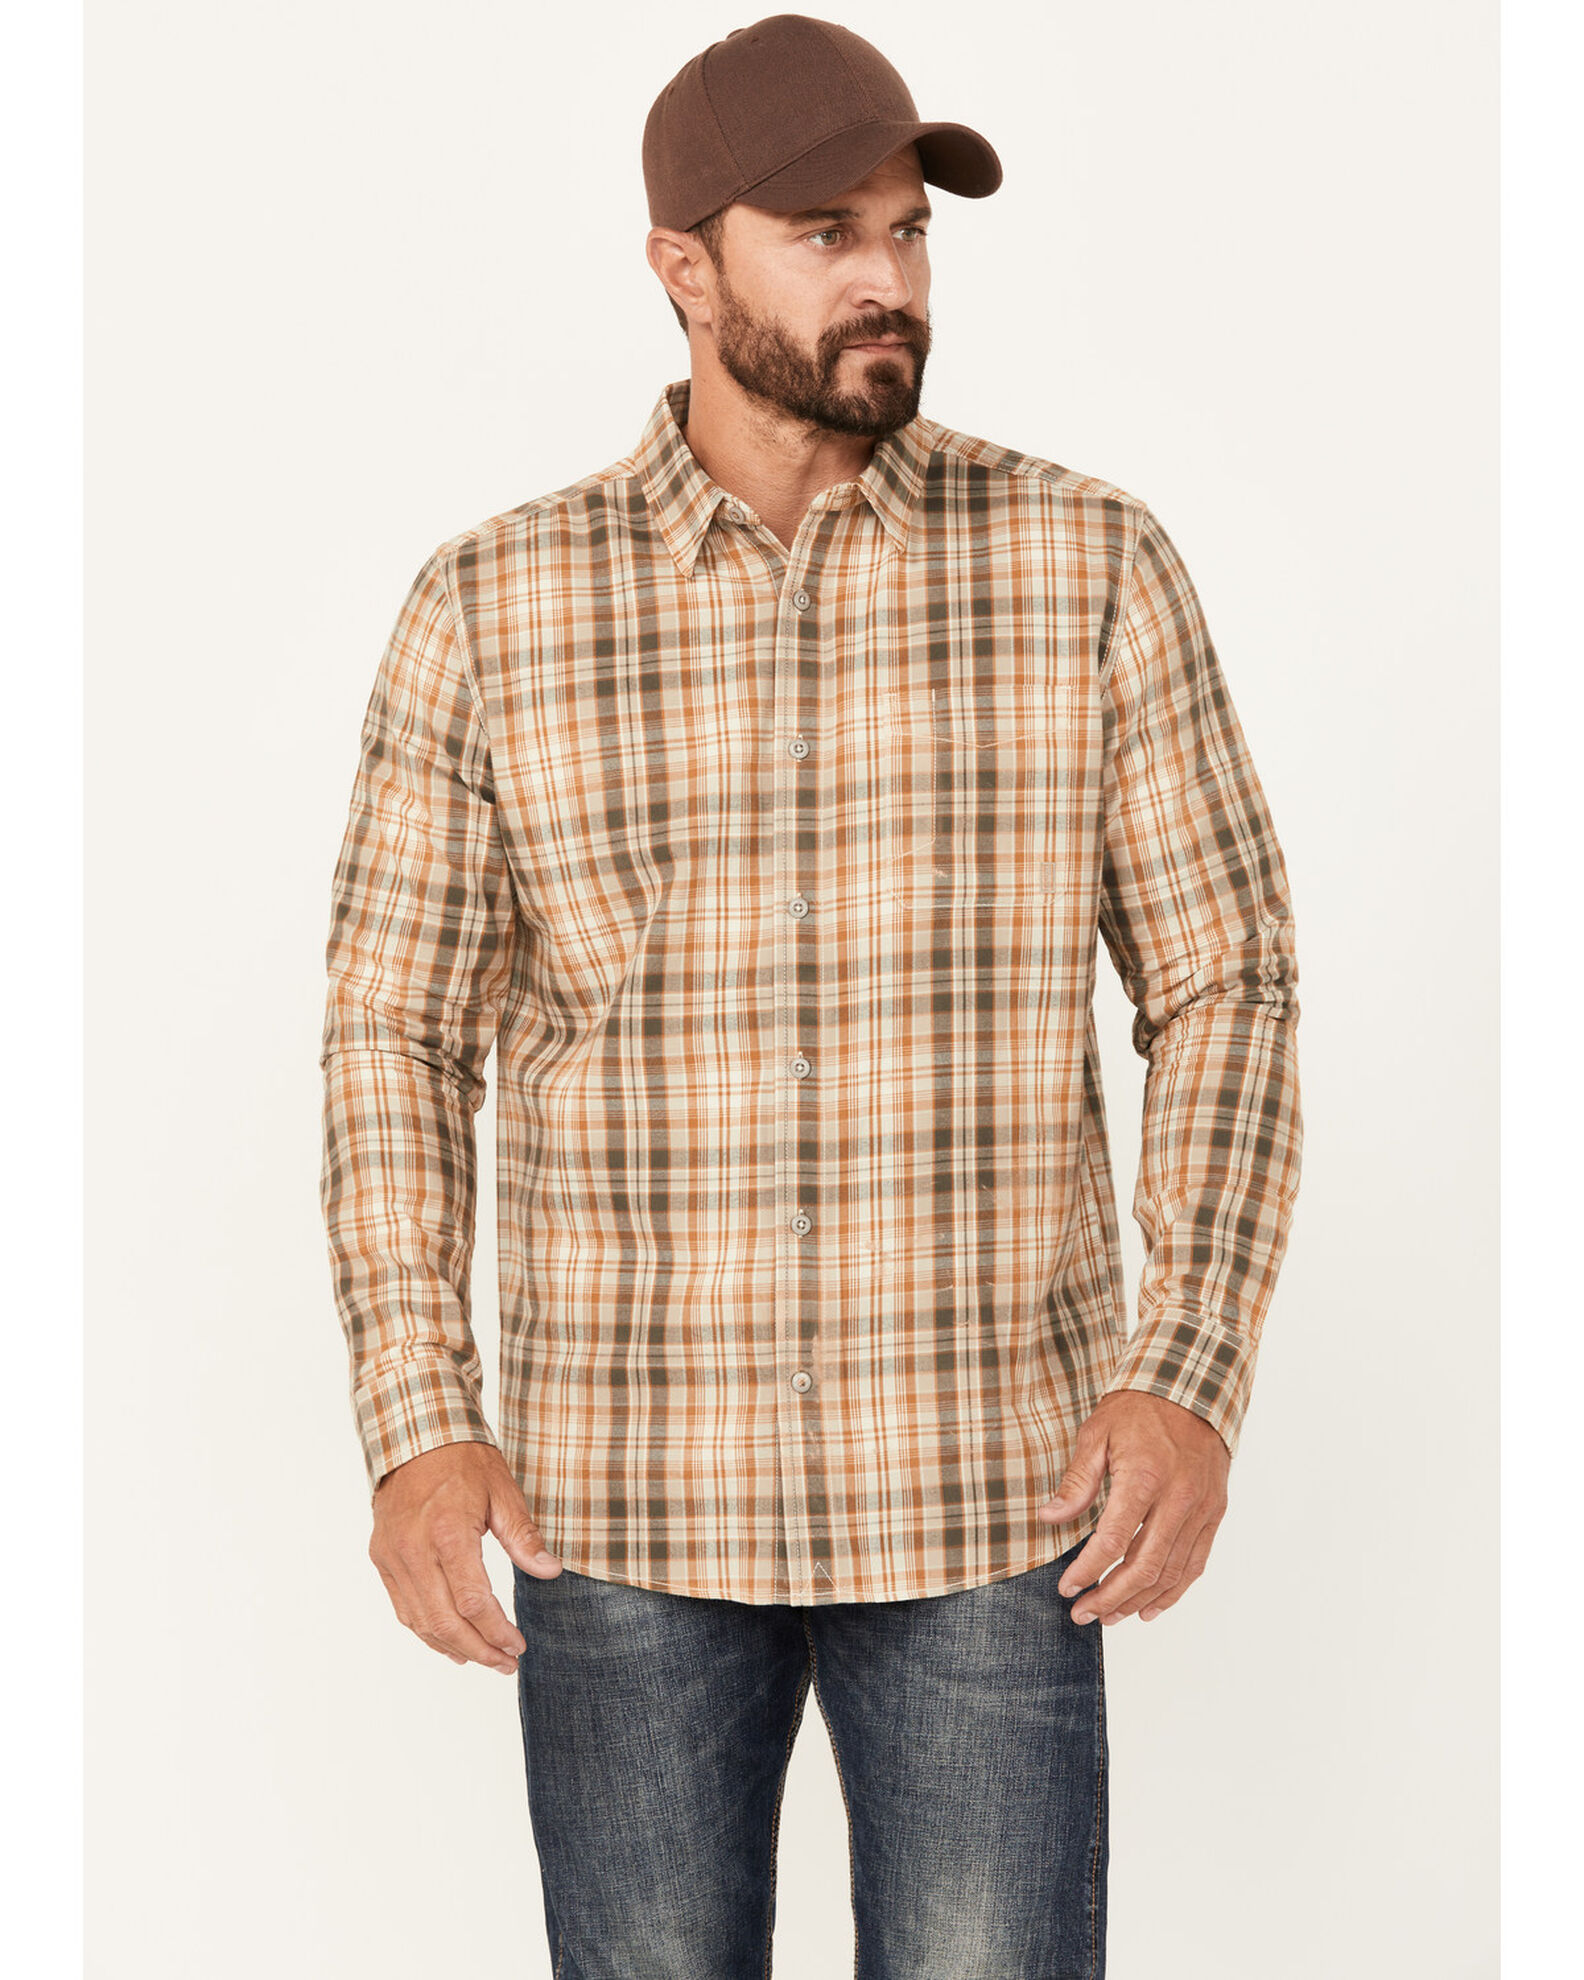 Brothers & Sons Men's Plaid Print Long Sleeve Button-Down Western Shirt